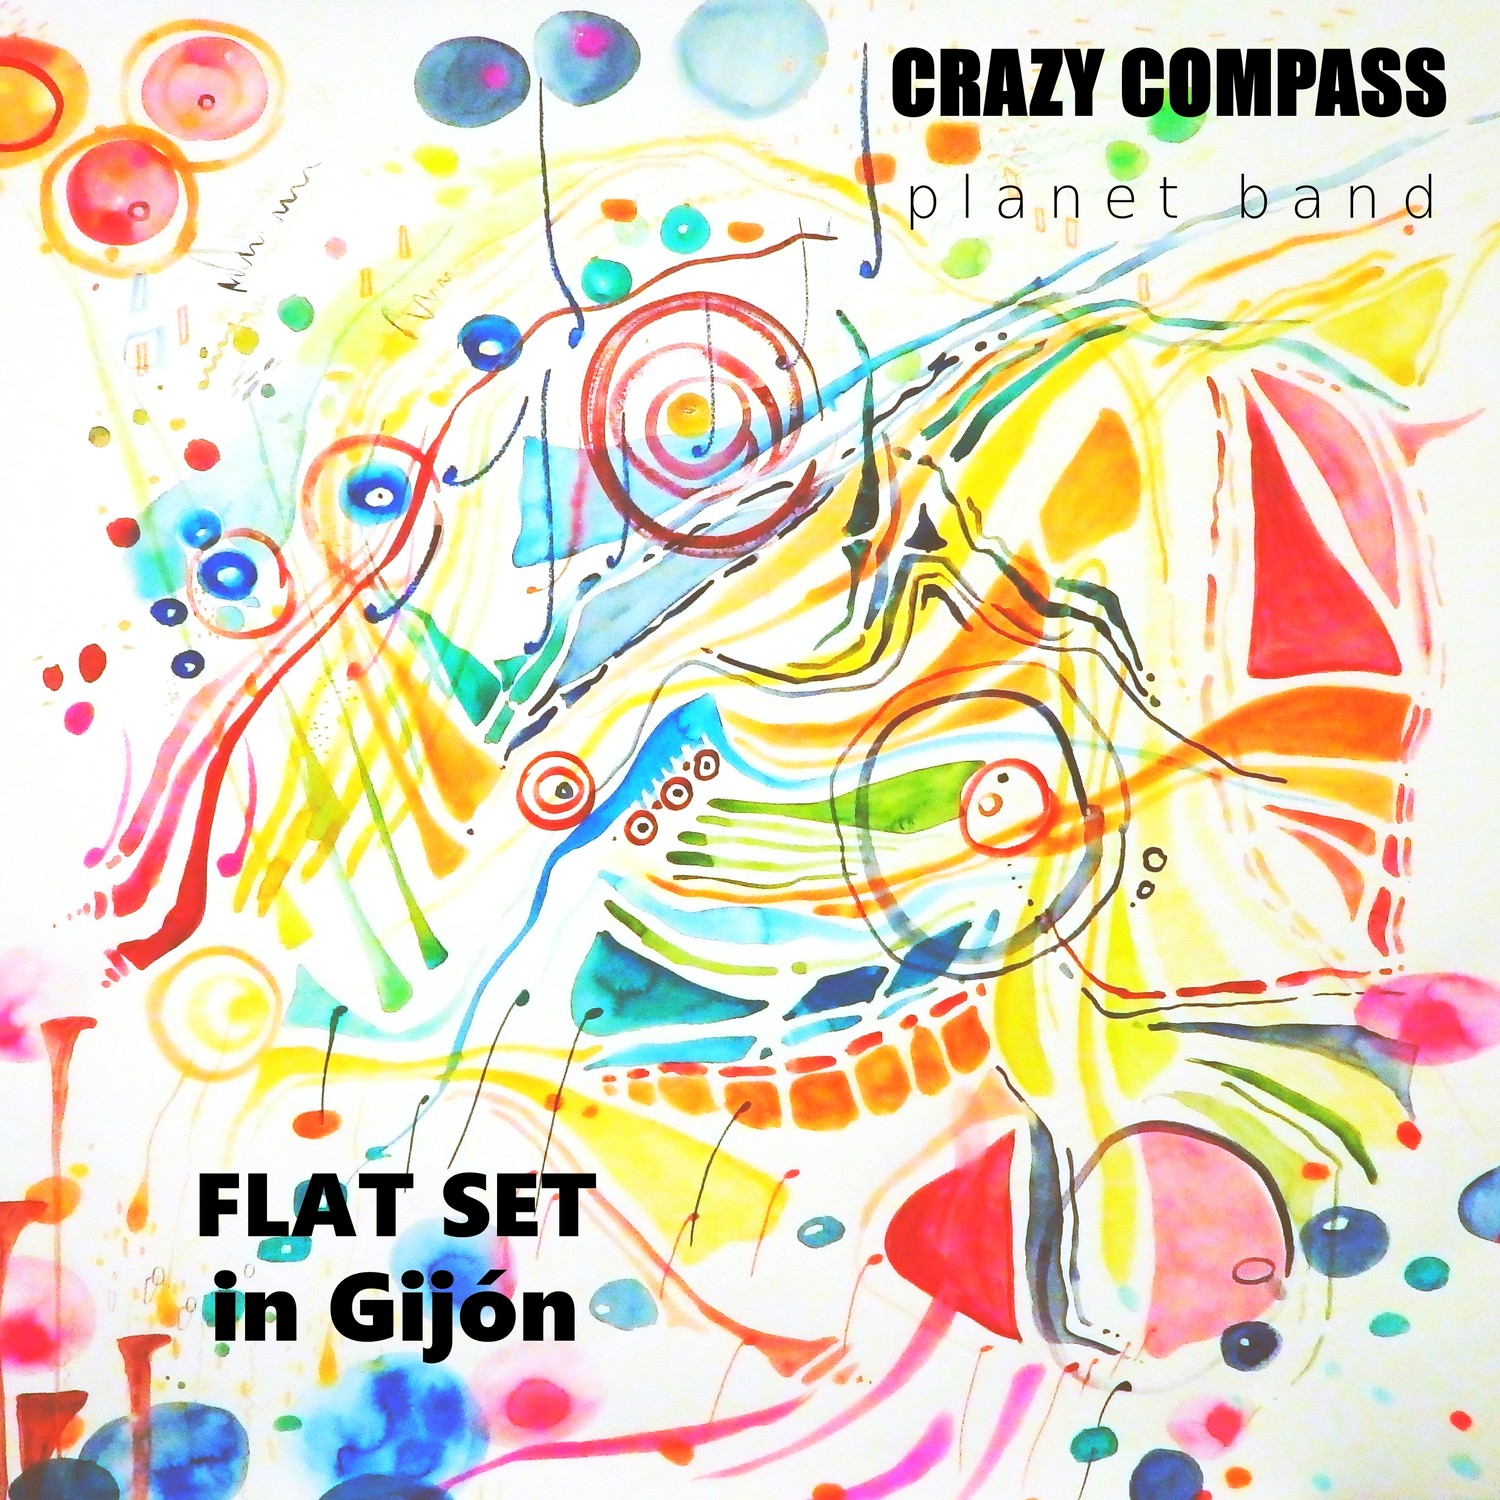 CRAZY COMPASS planet band - FLAT SET in Gijon